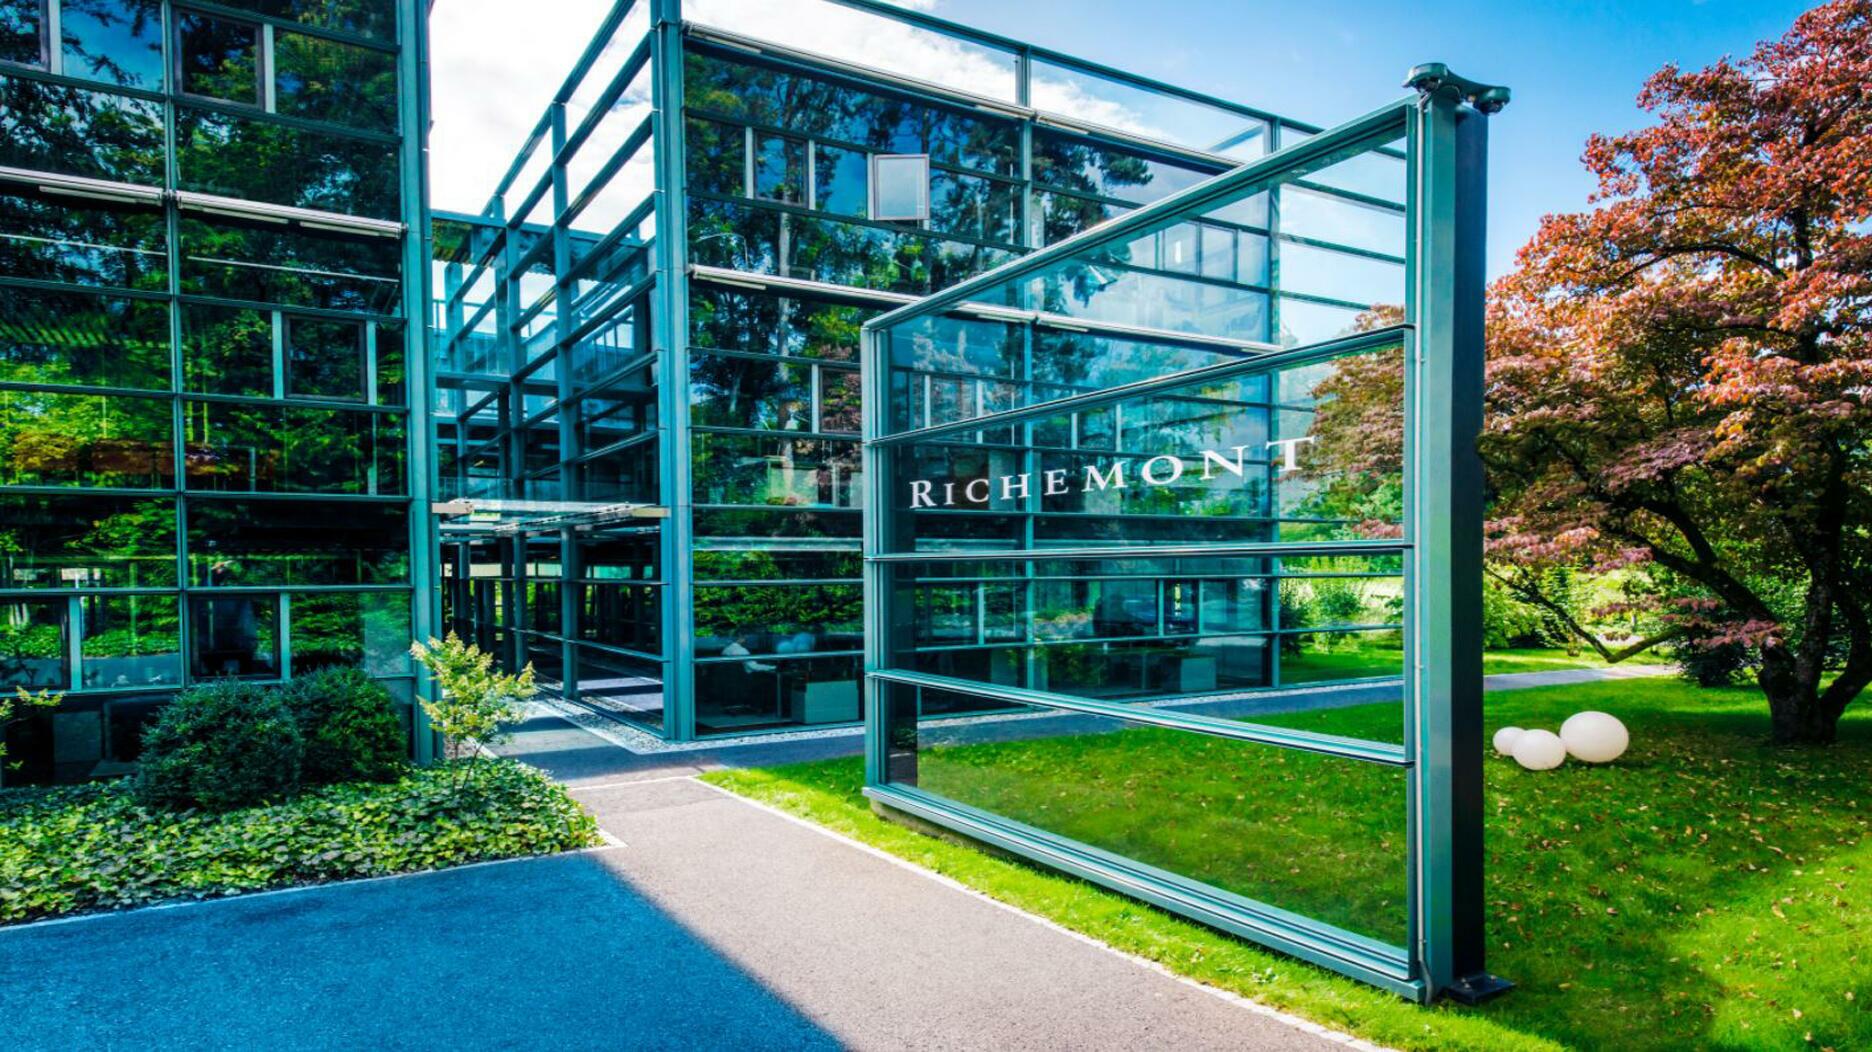 Richemont Posts Strong Q4 as Jewelry Sales Rebound